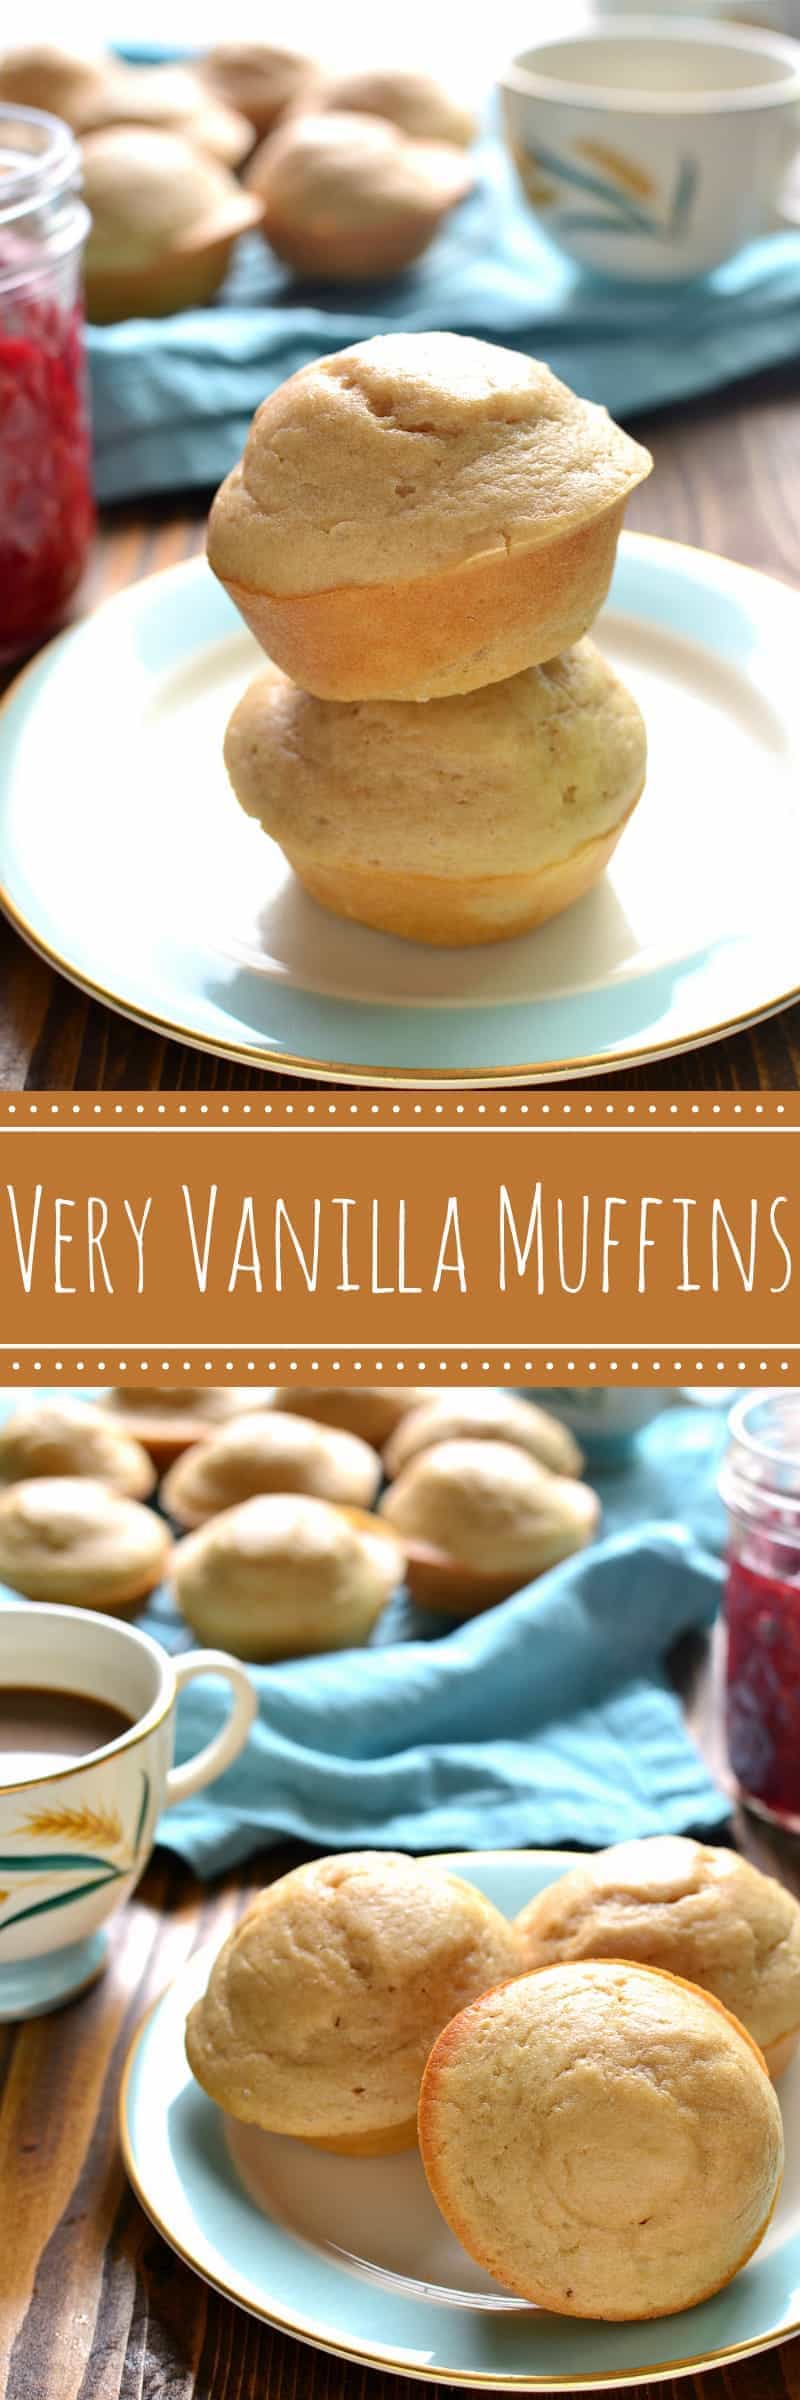 titled photo collage - Very Vanilla Muffins 